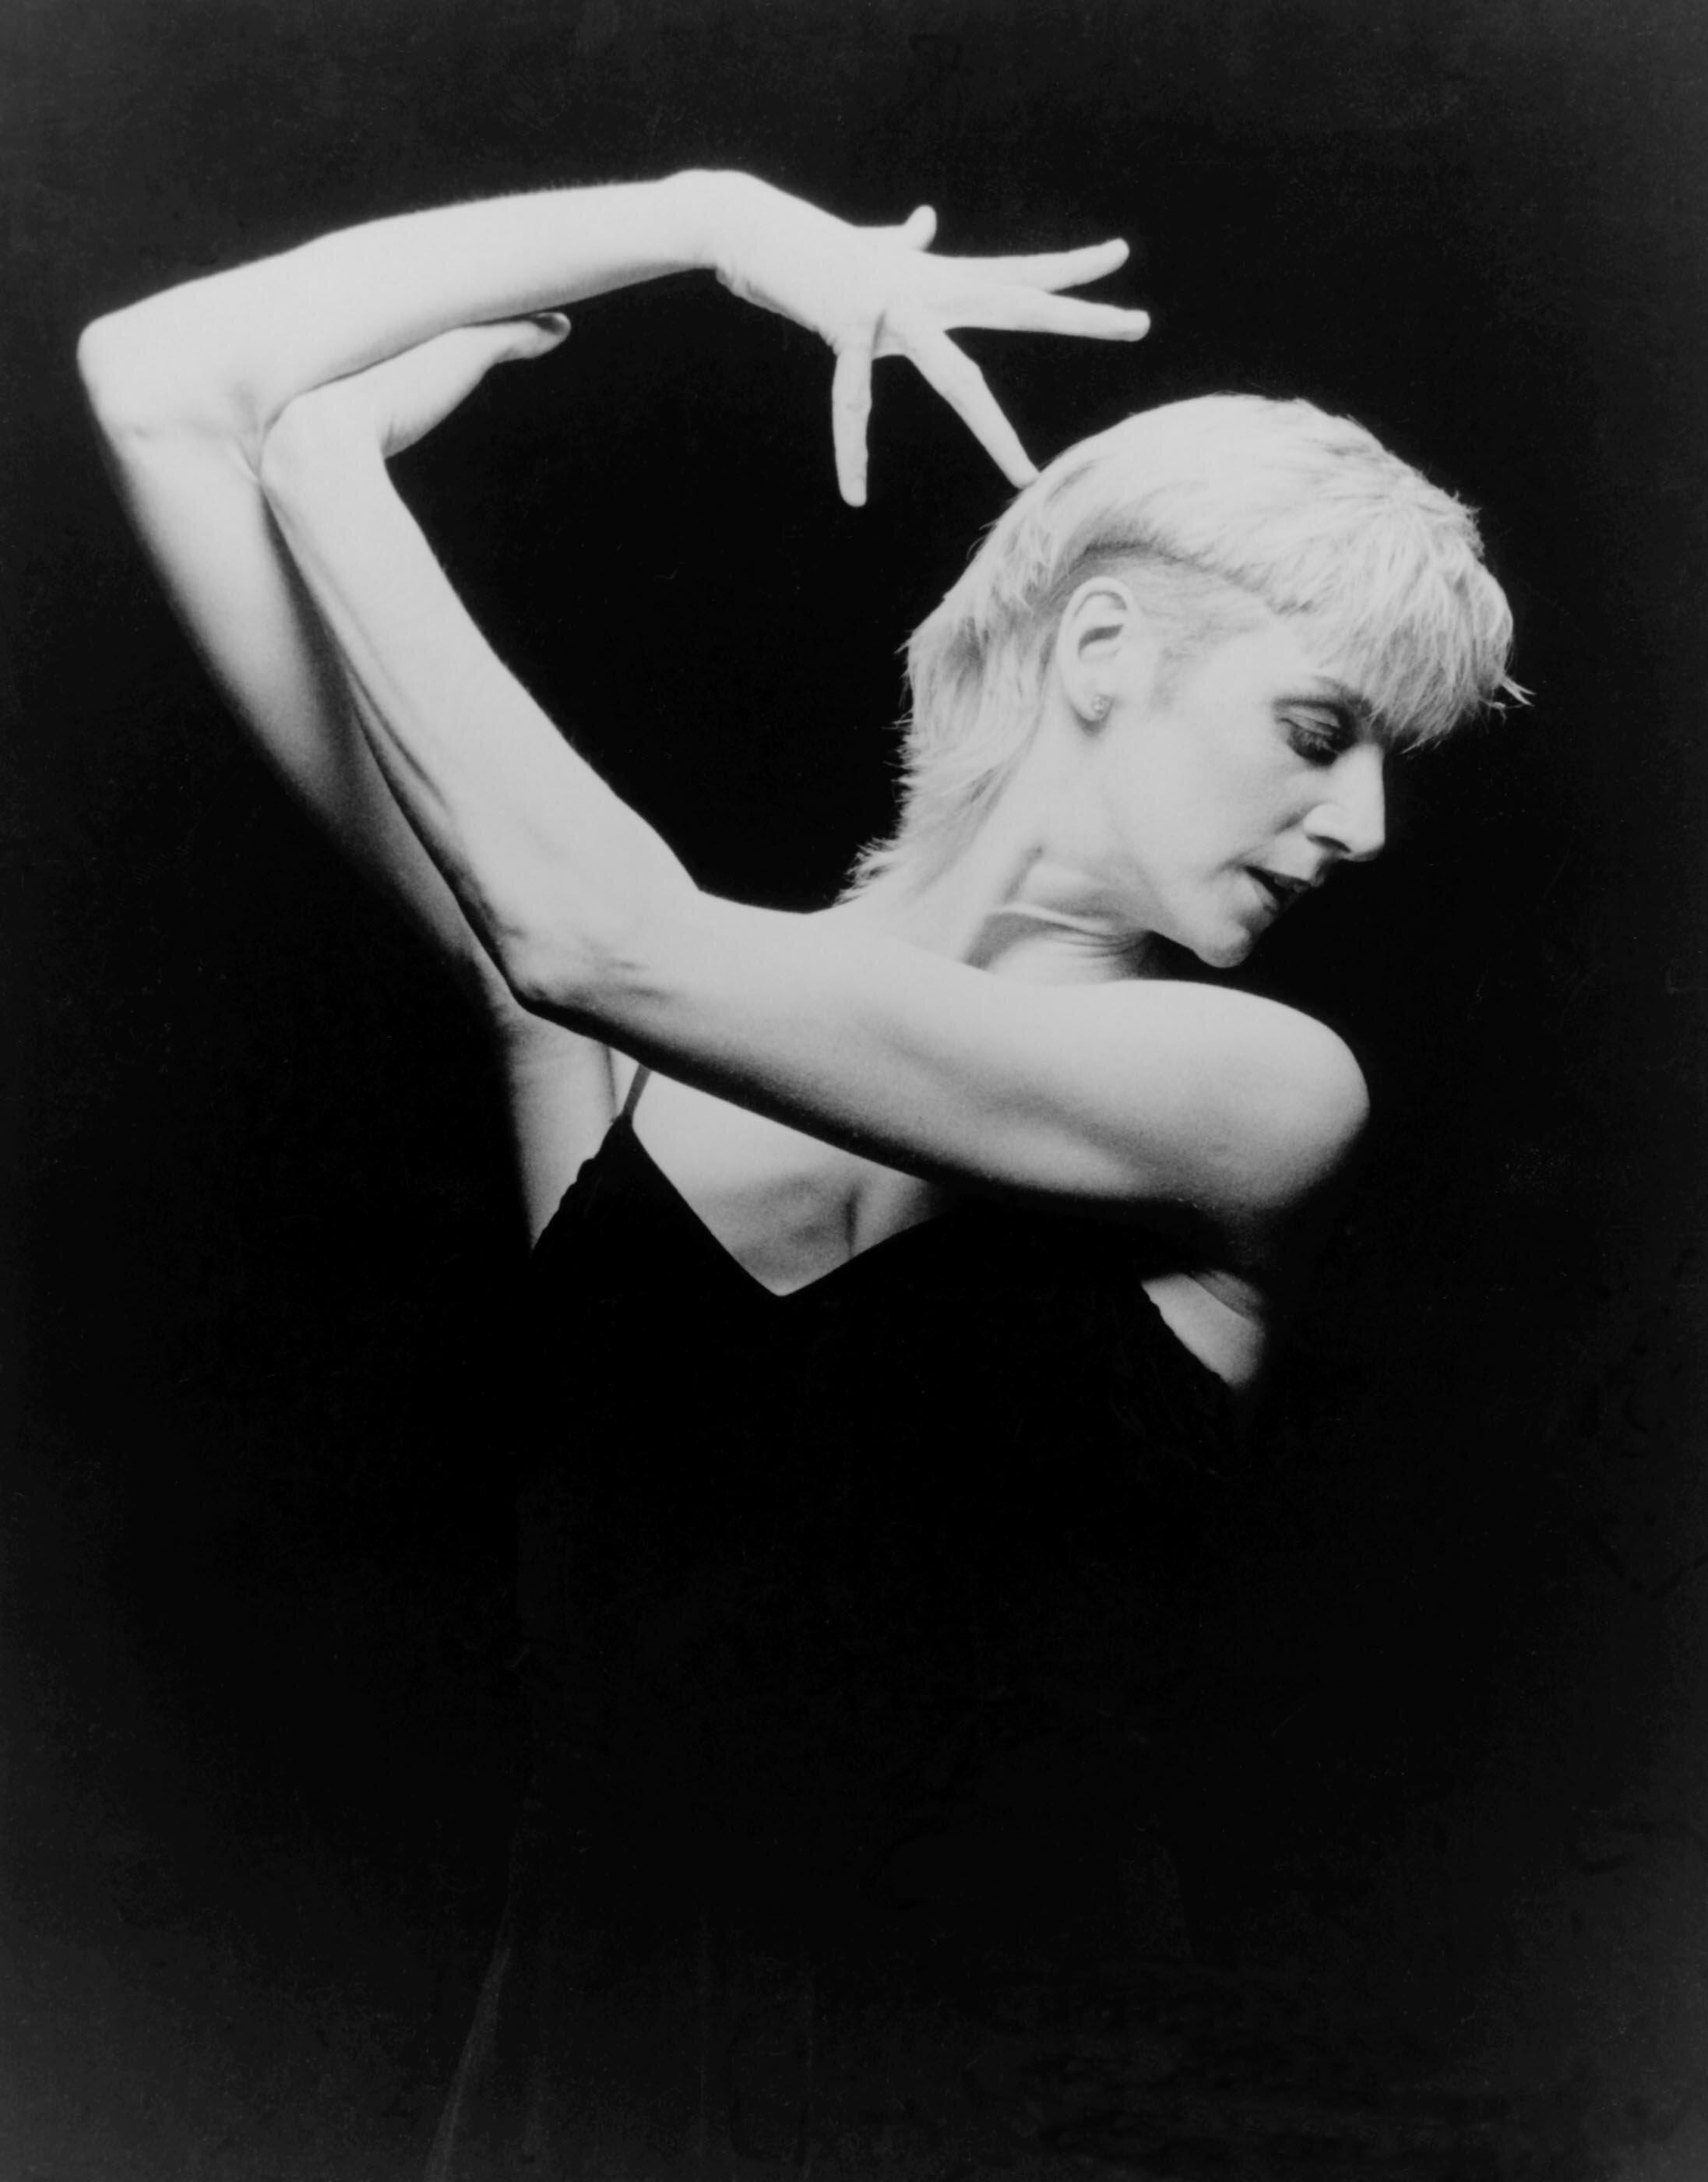 Photo of Peggy Baker in Lar Lubovitch work by Michael Scott